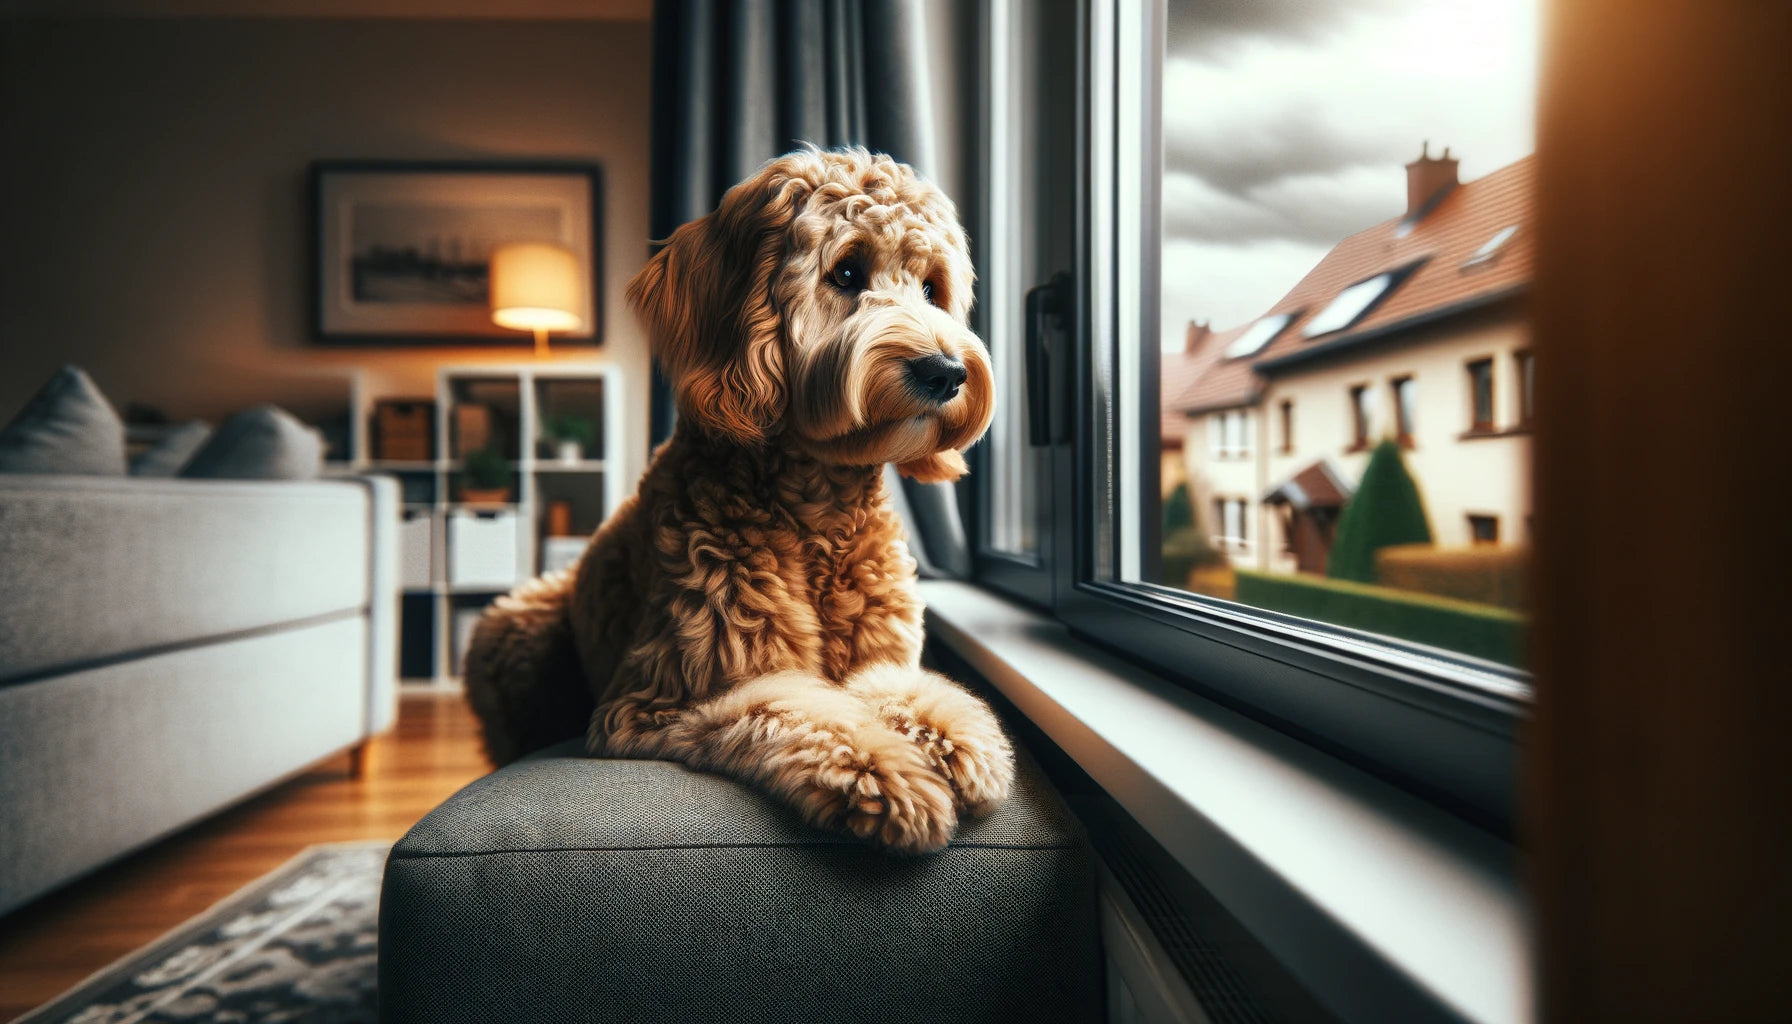 Vigilant Mini Goldendoodle perched by the window watching the outside world, symbolizing the breed's alertness and protective instinct.